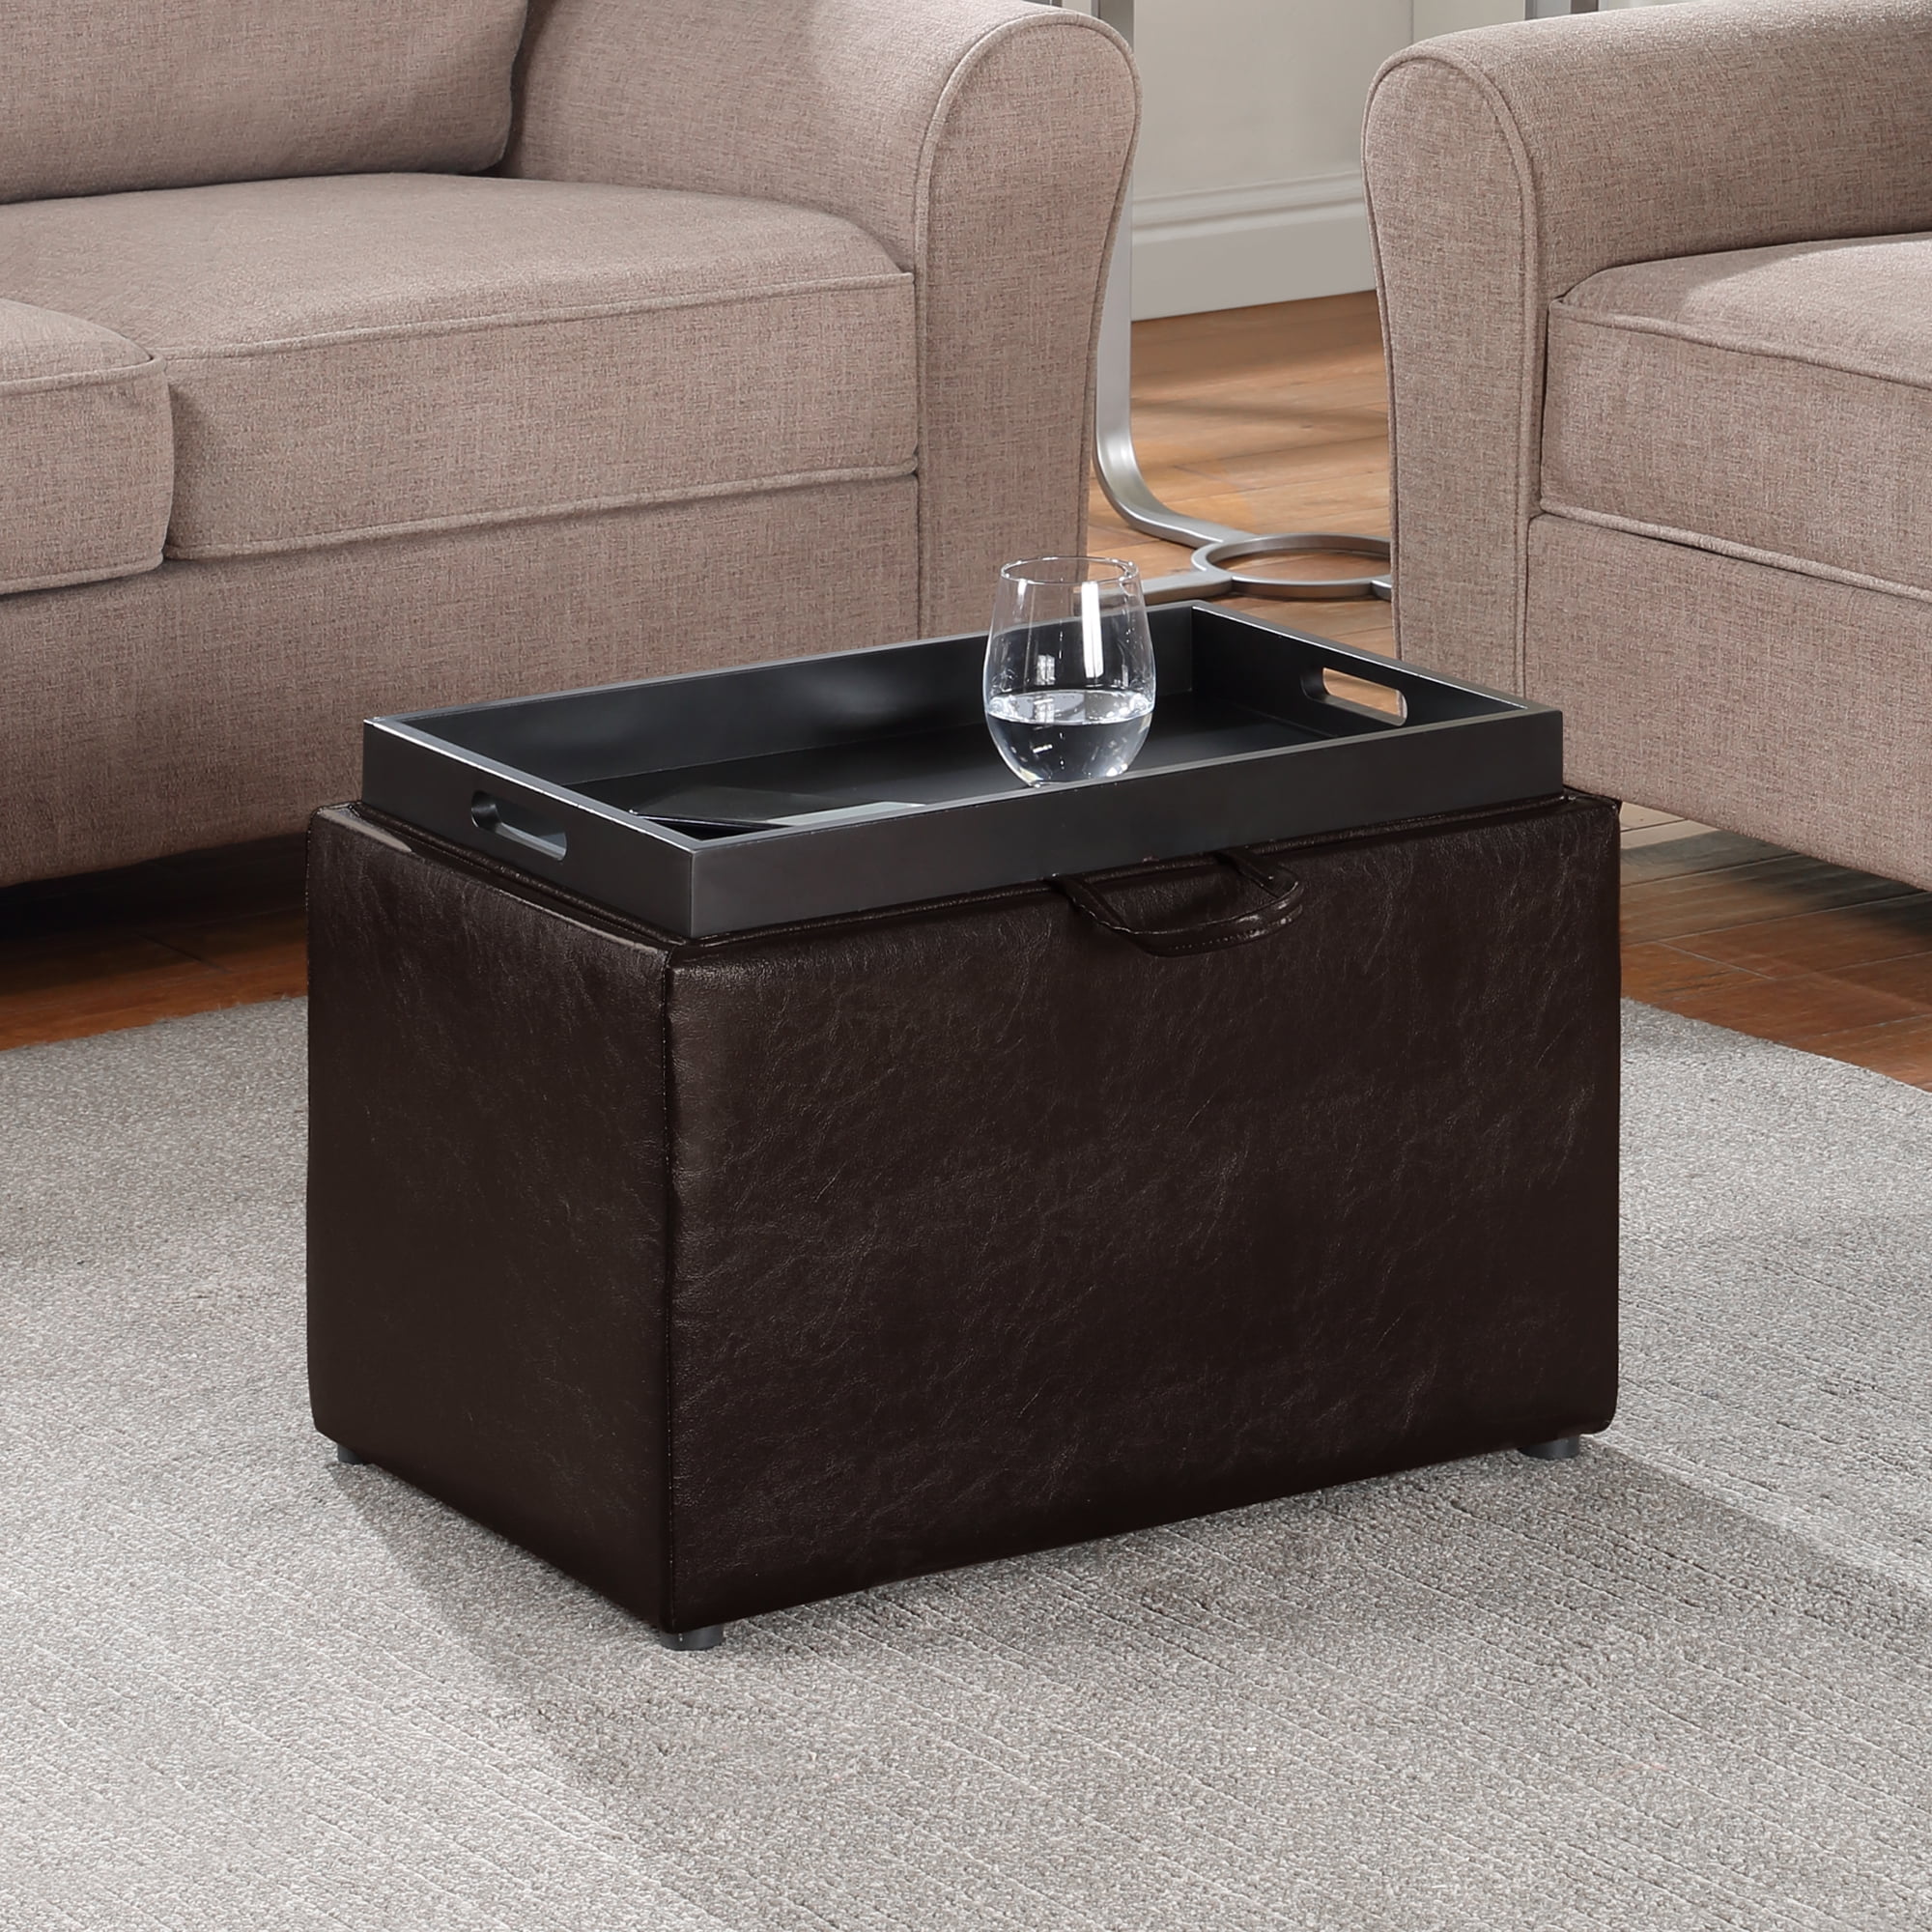 Convenience Concepts Designs4Comfort Accent Storage Ottoman with Reversible Tray, Espresso Faux Leather - image 1 of 8